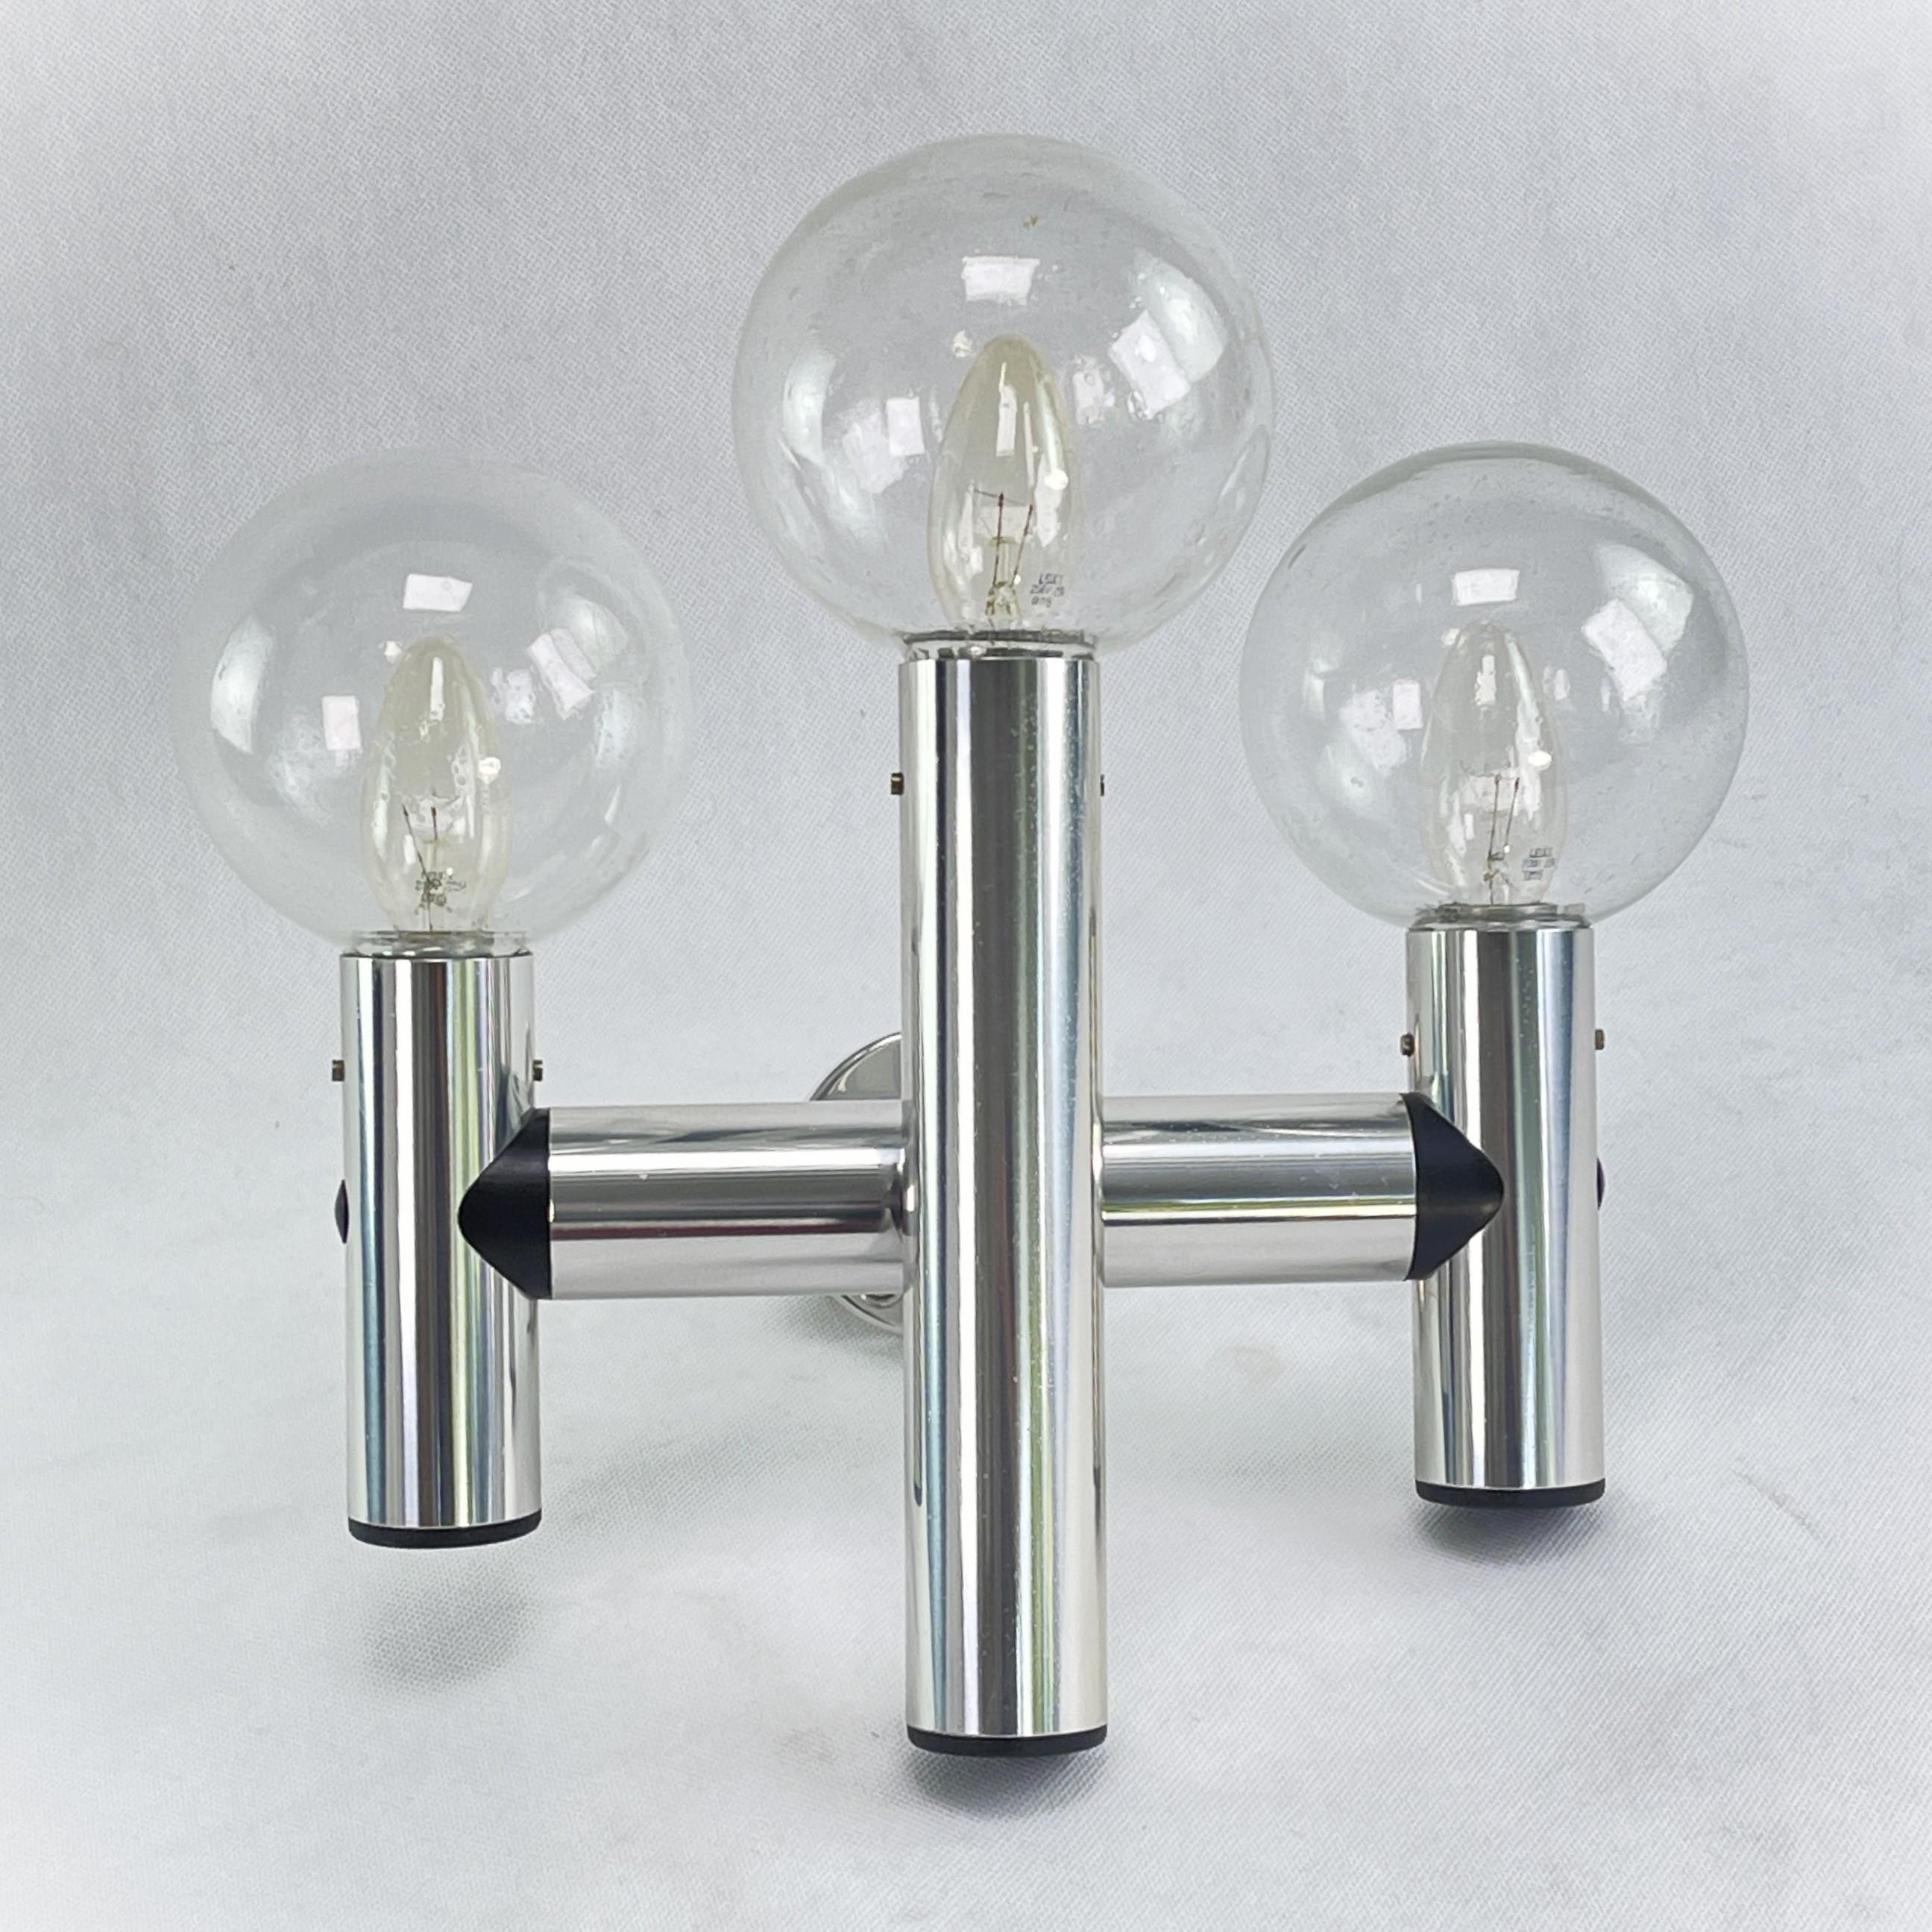 European Set of 2 Aluminium Wall Lamps by JT Kalmar, Modell RS 3 WL, 1970s For Sale